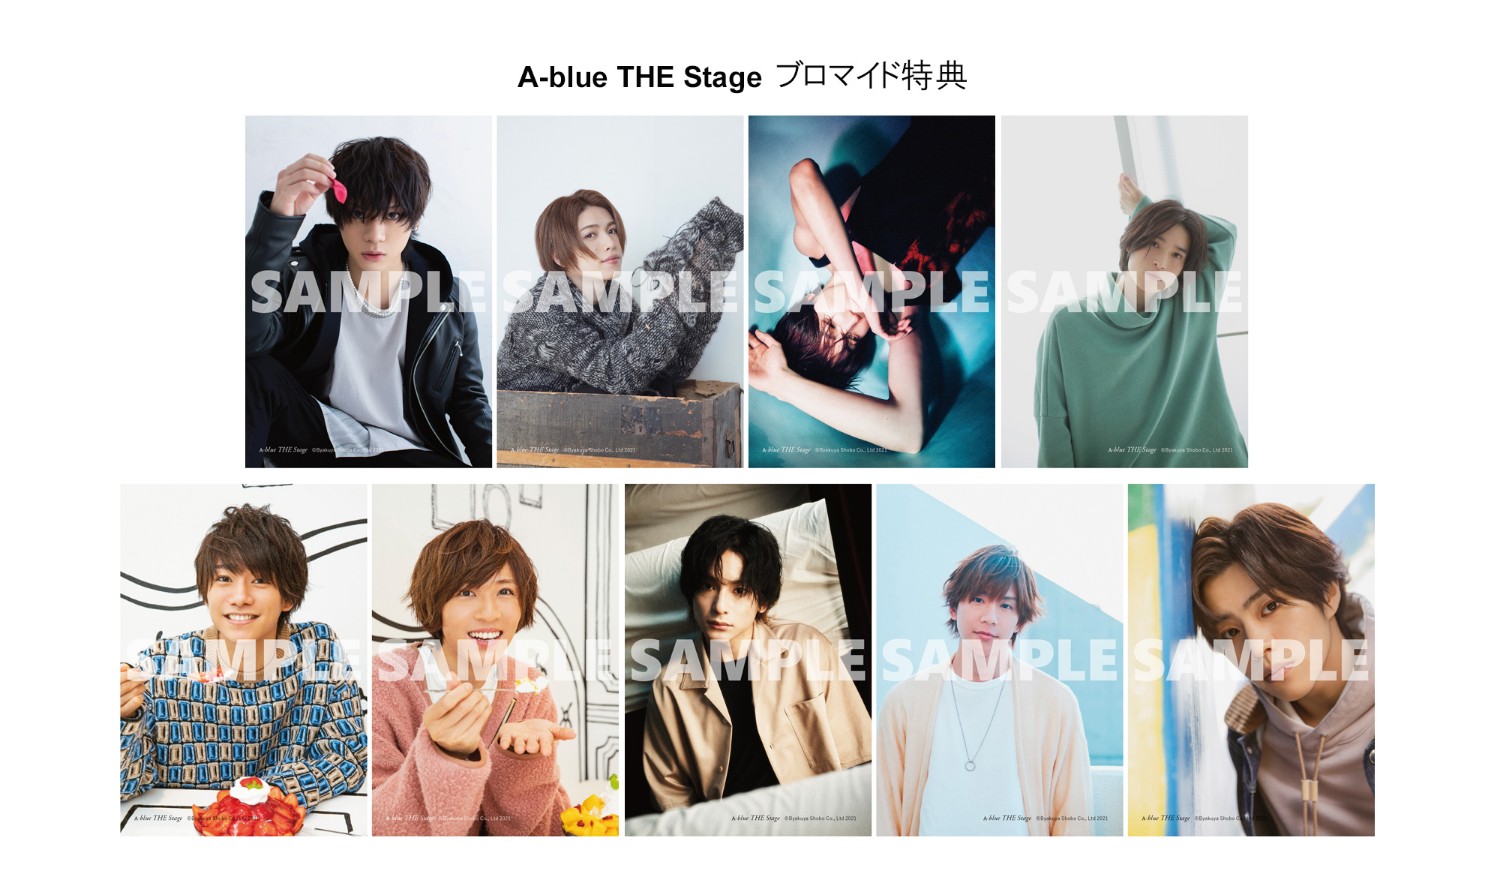 A-blue THE Stage 高橋文哉-eastgate.mk